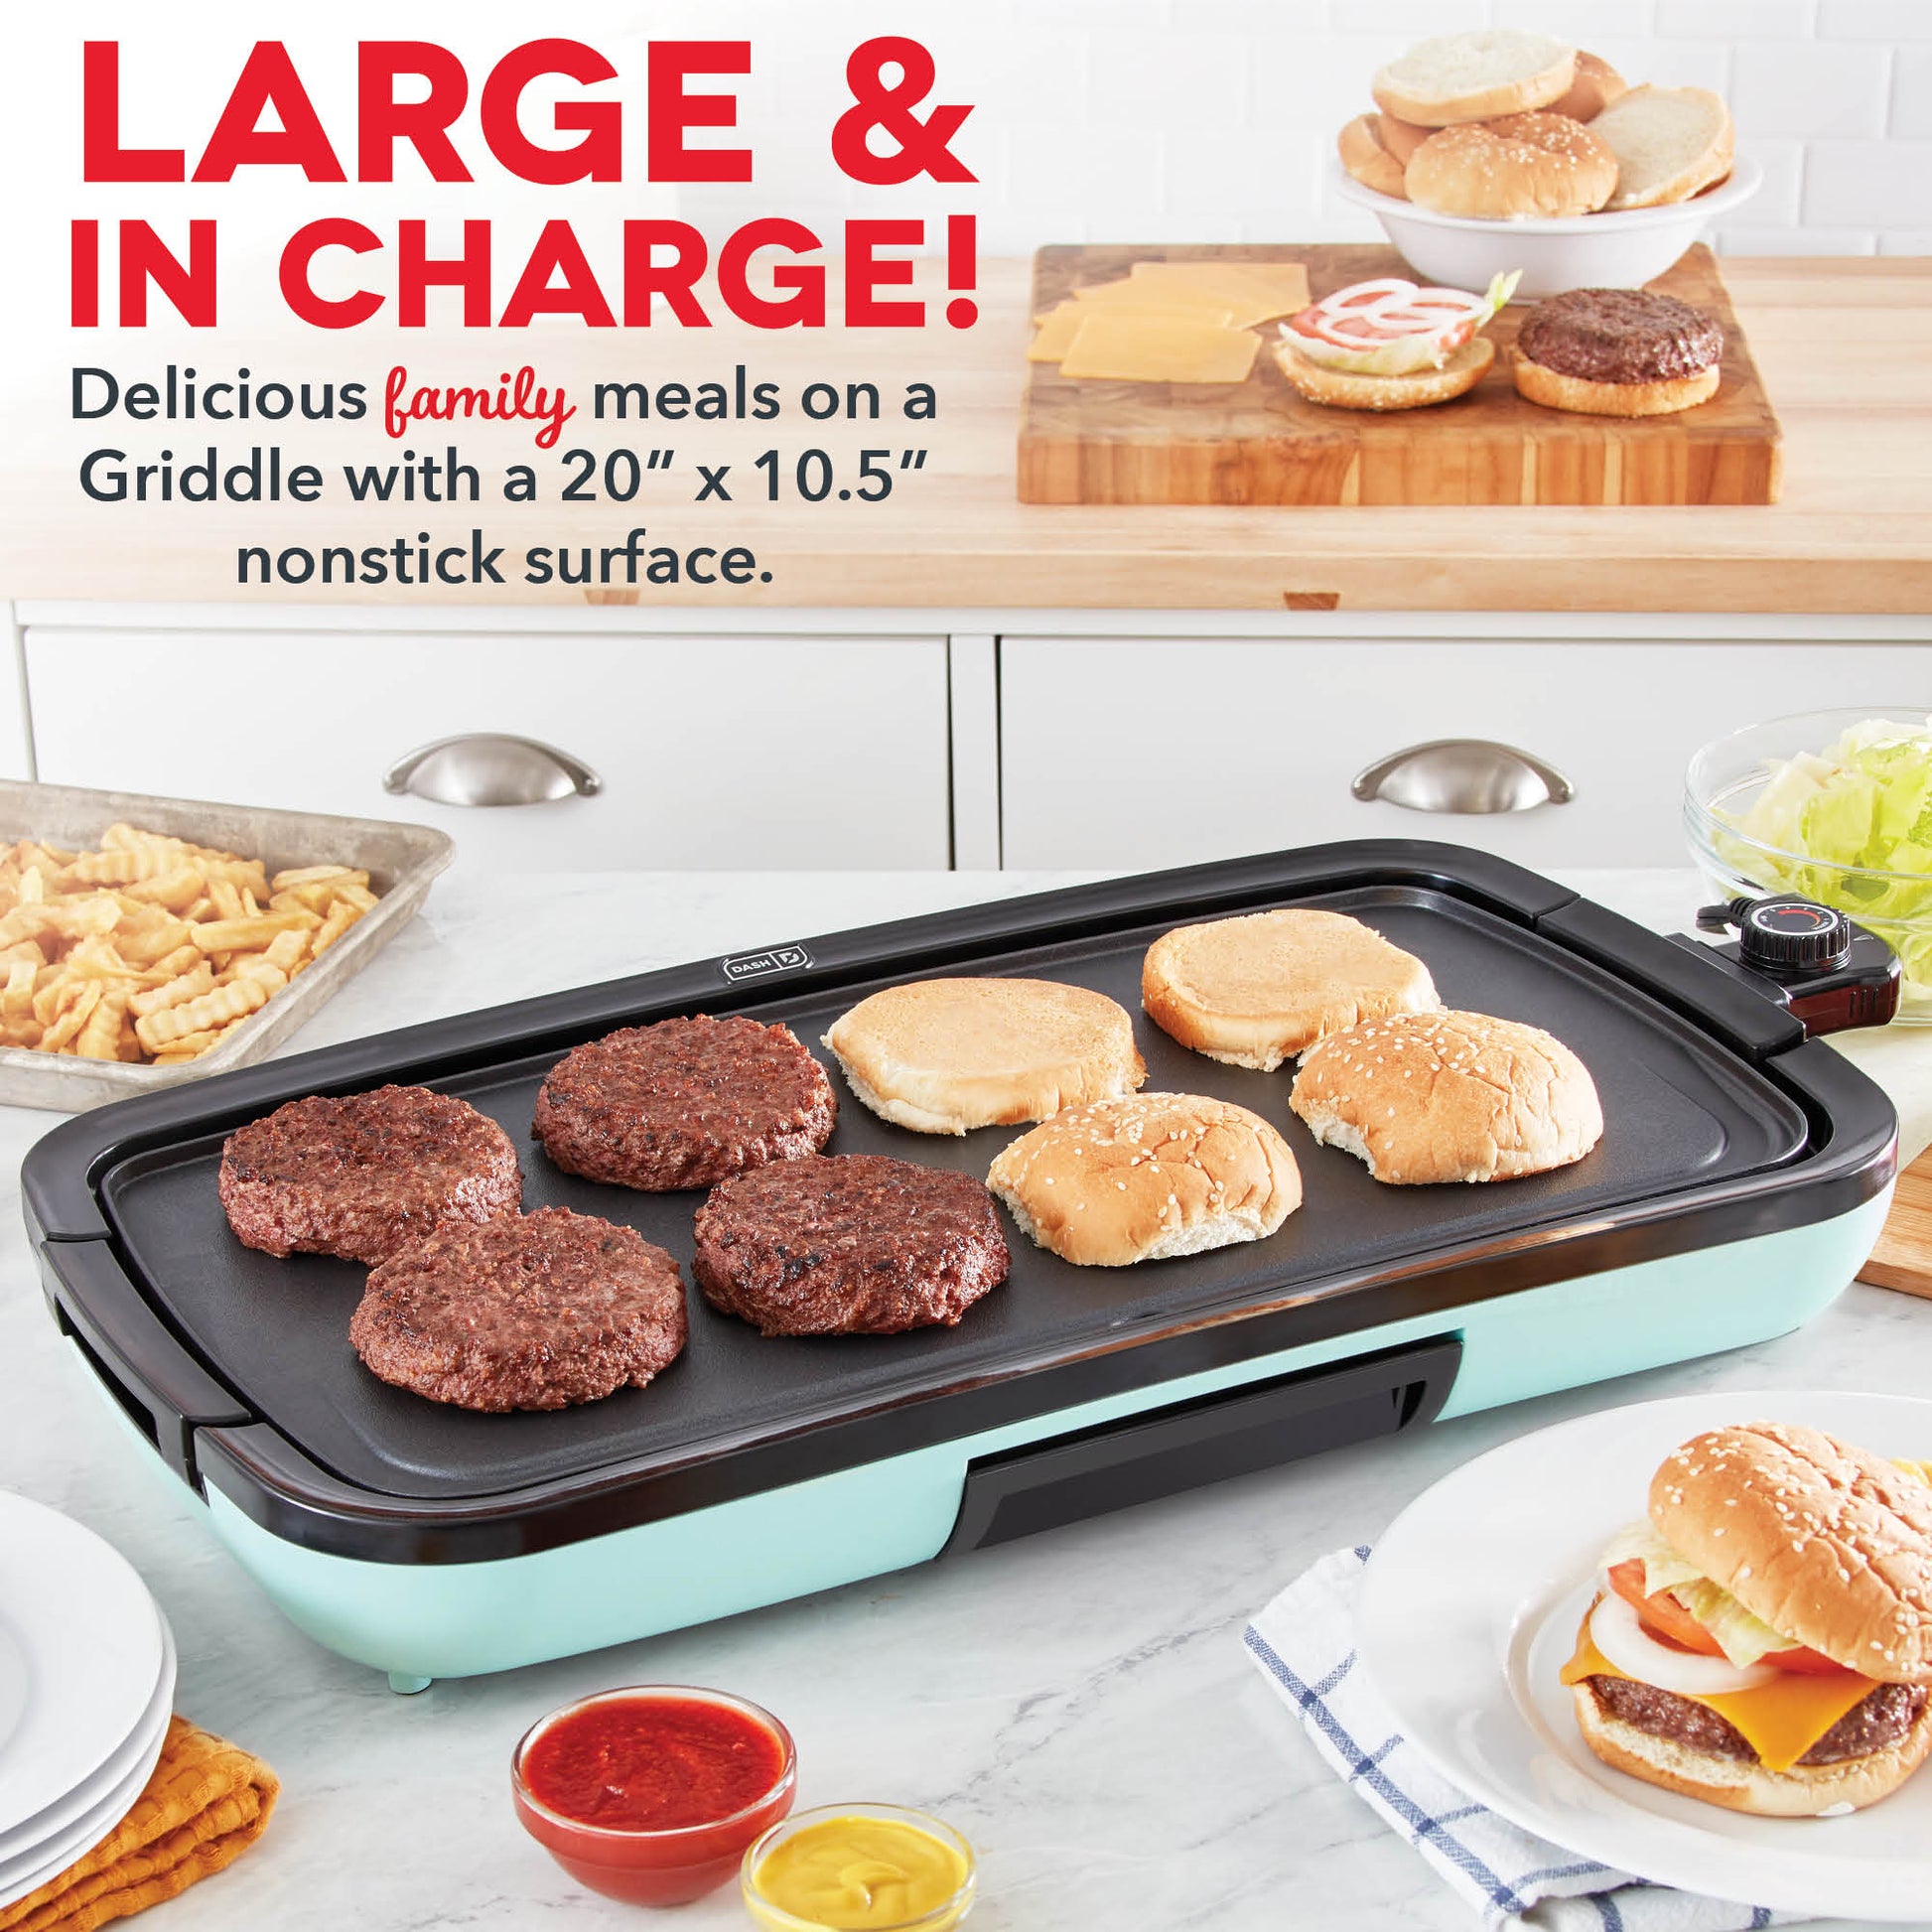  DASH Everyday Nonstick Electric Griddle for Pancakes